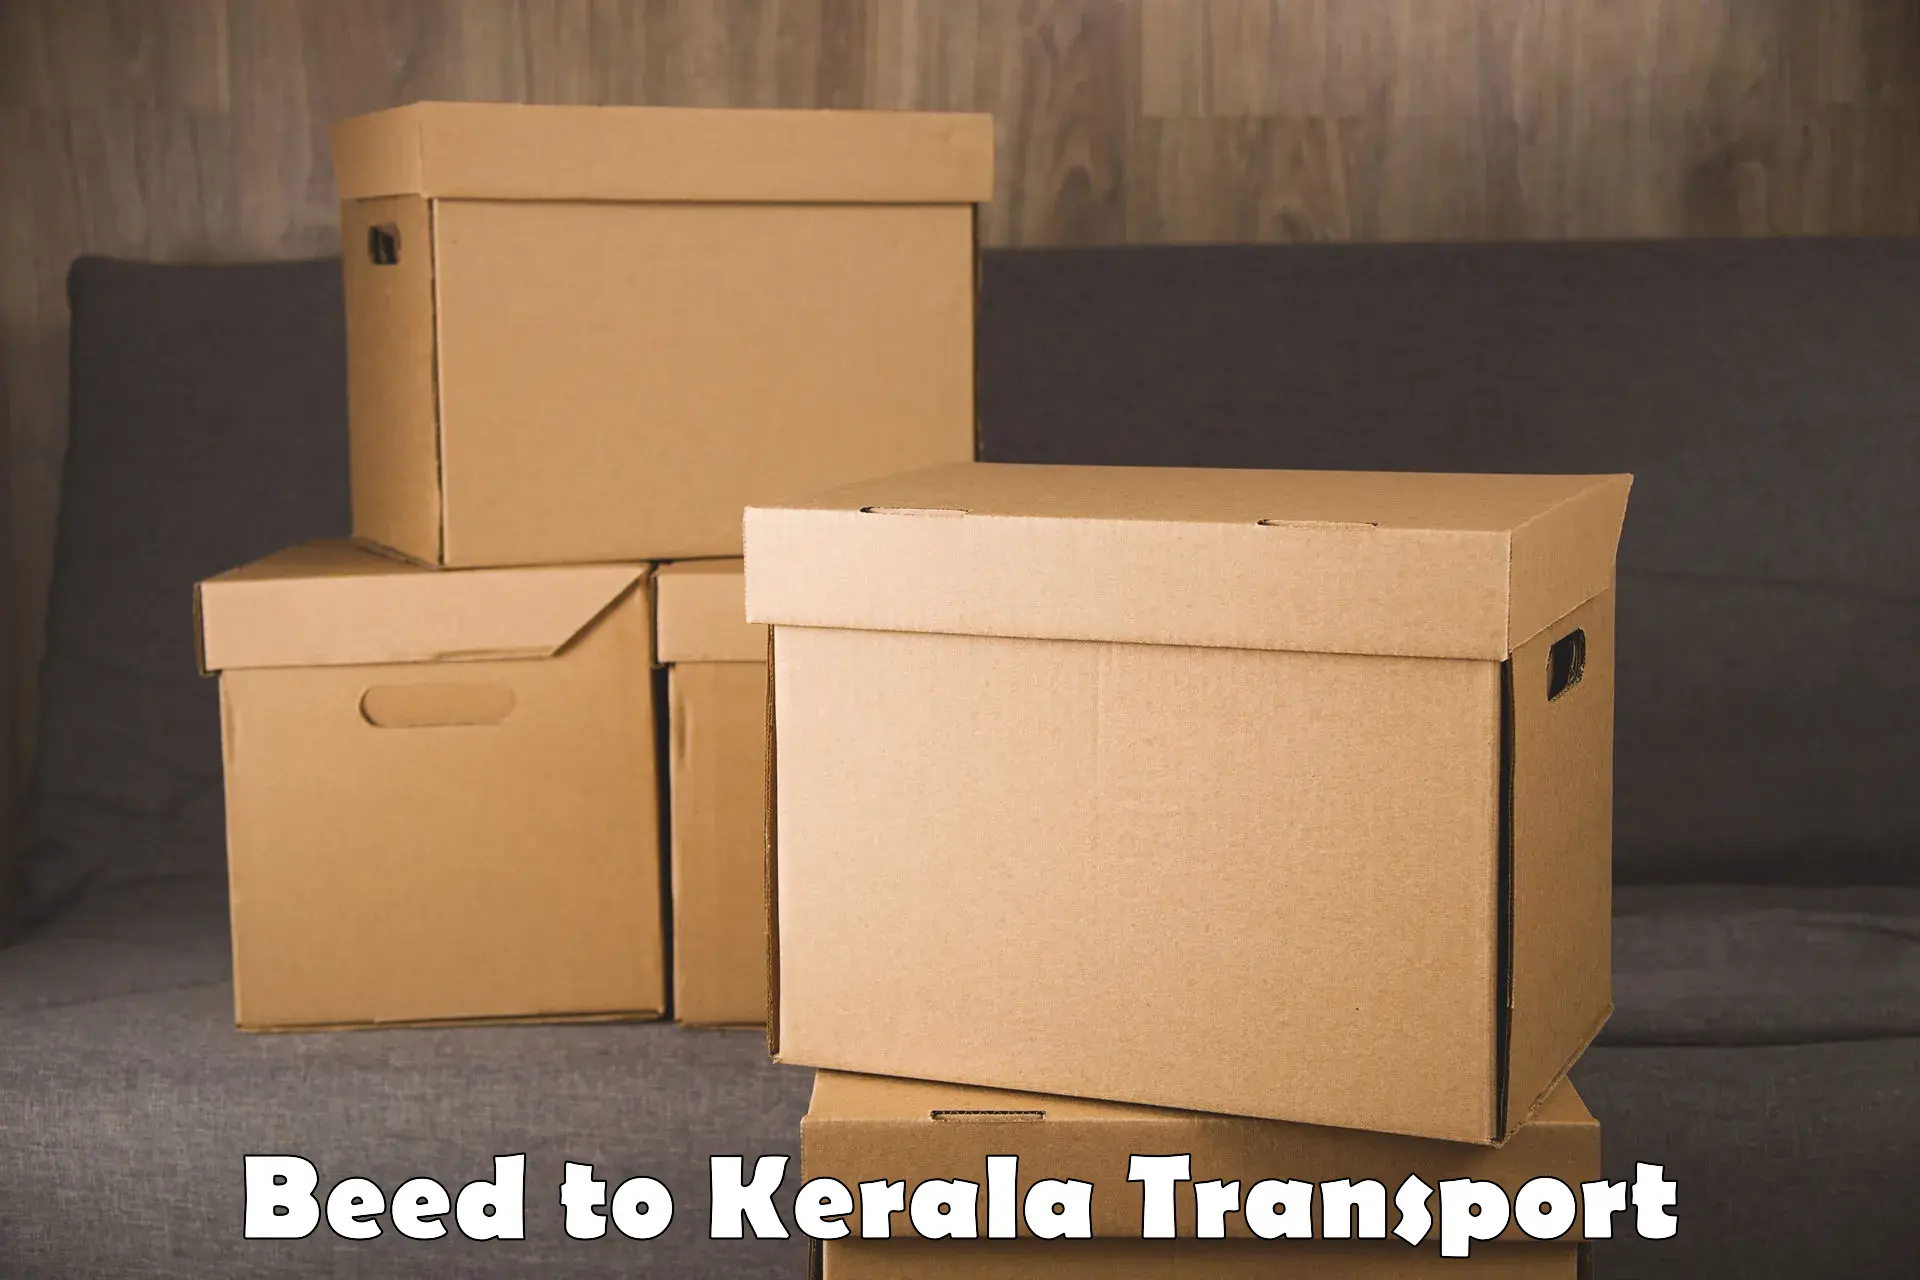 Pick up transport service Beed to Trivandrum